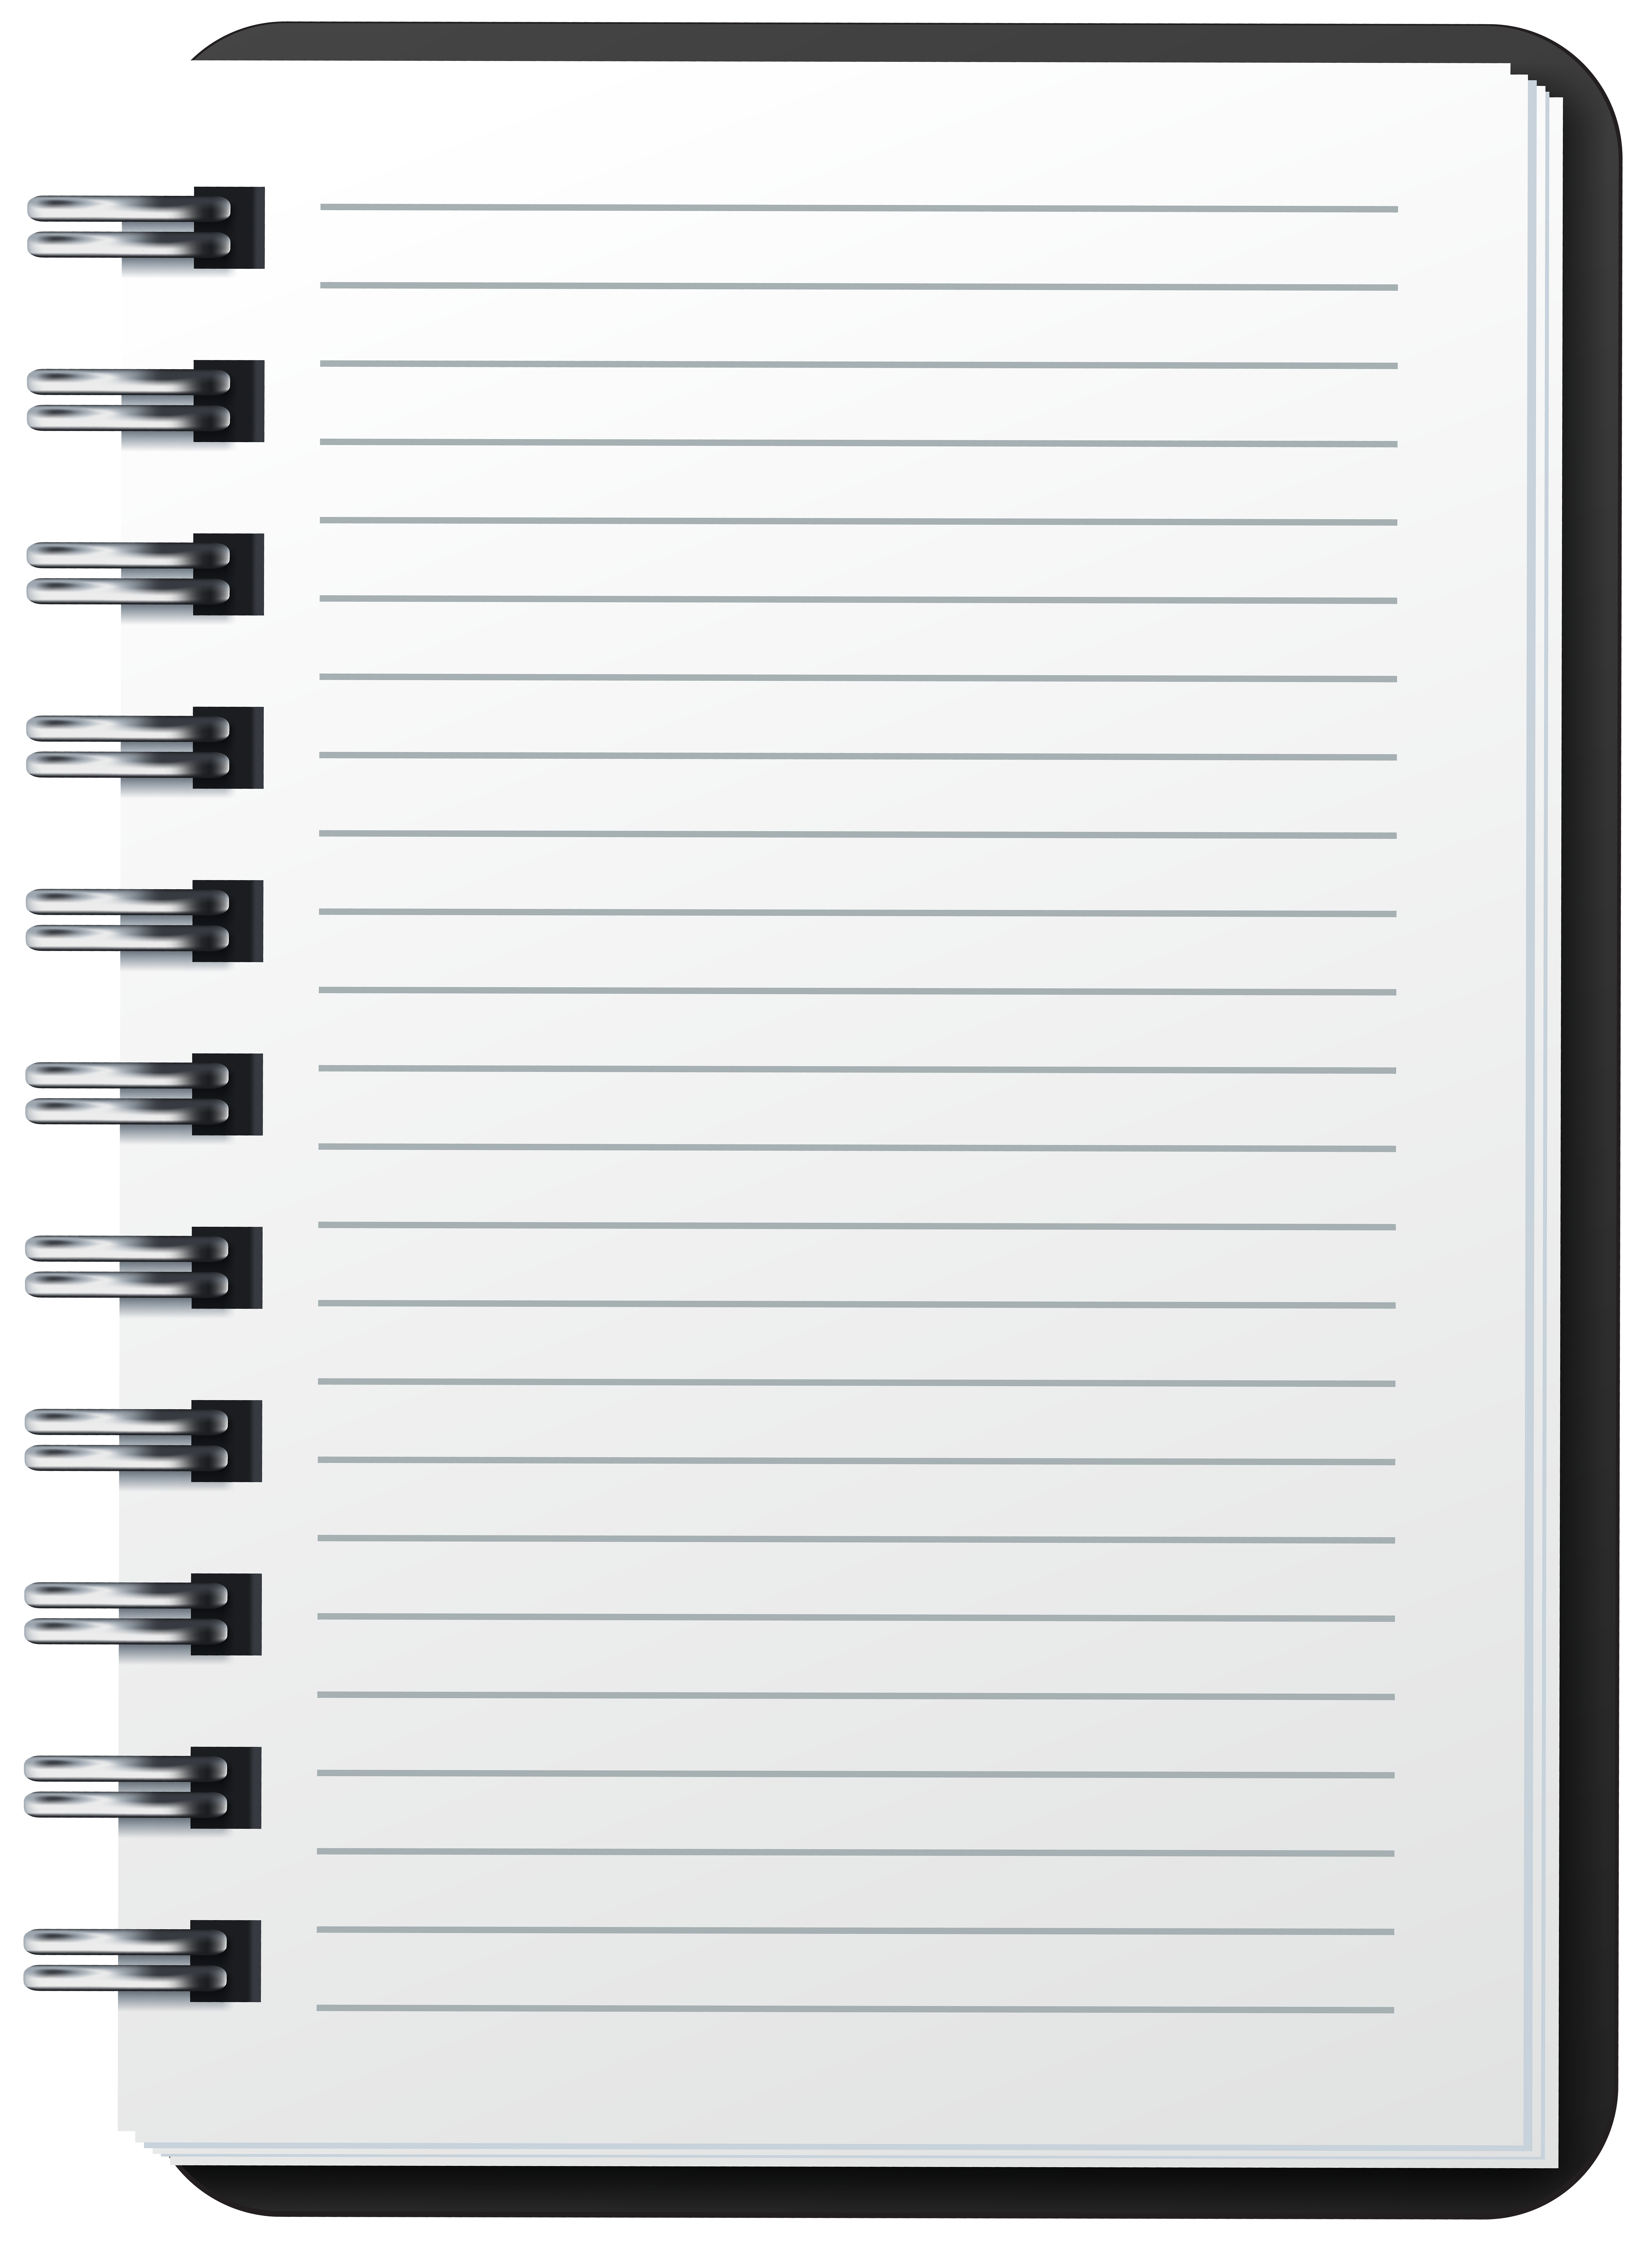 Spiral Notebook Png Clipart Image Gallery Yopriceville High Quality Images And Transparent Png Free Clipart